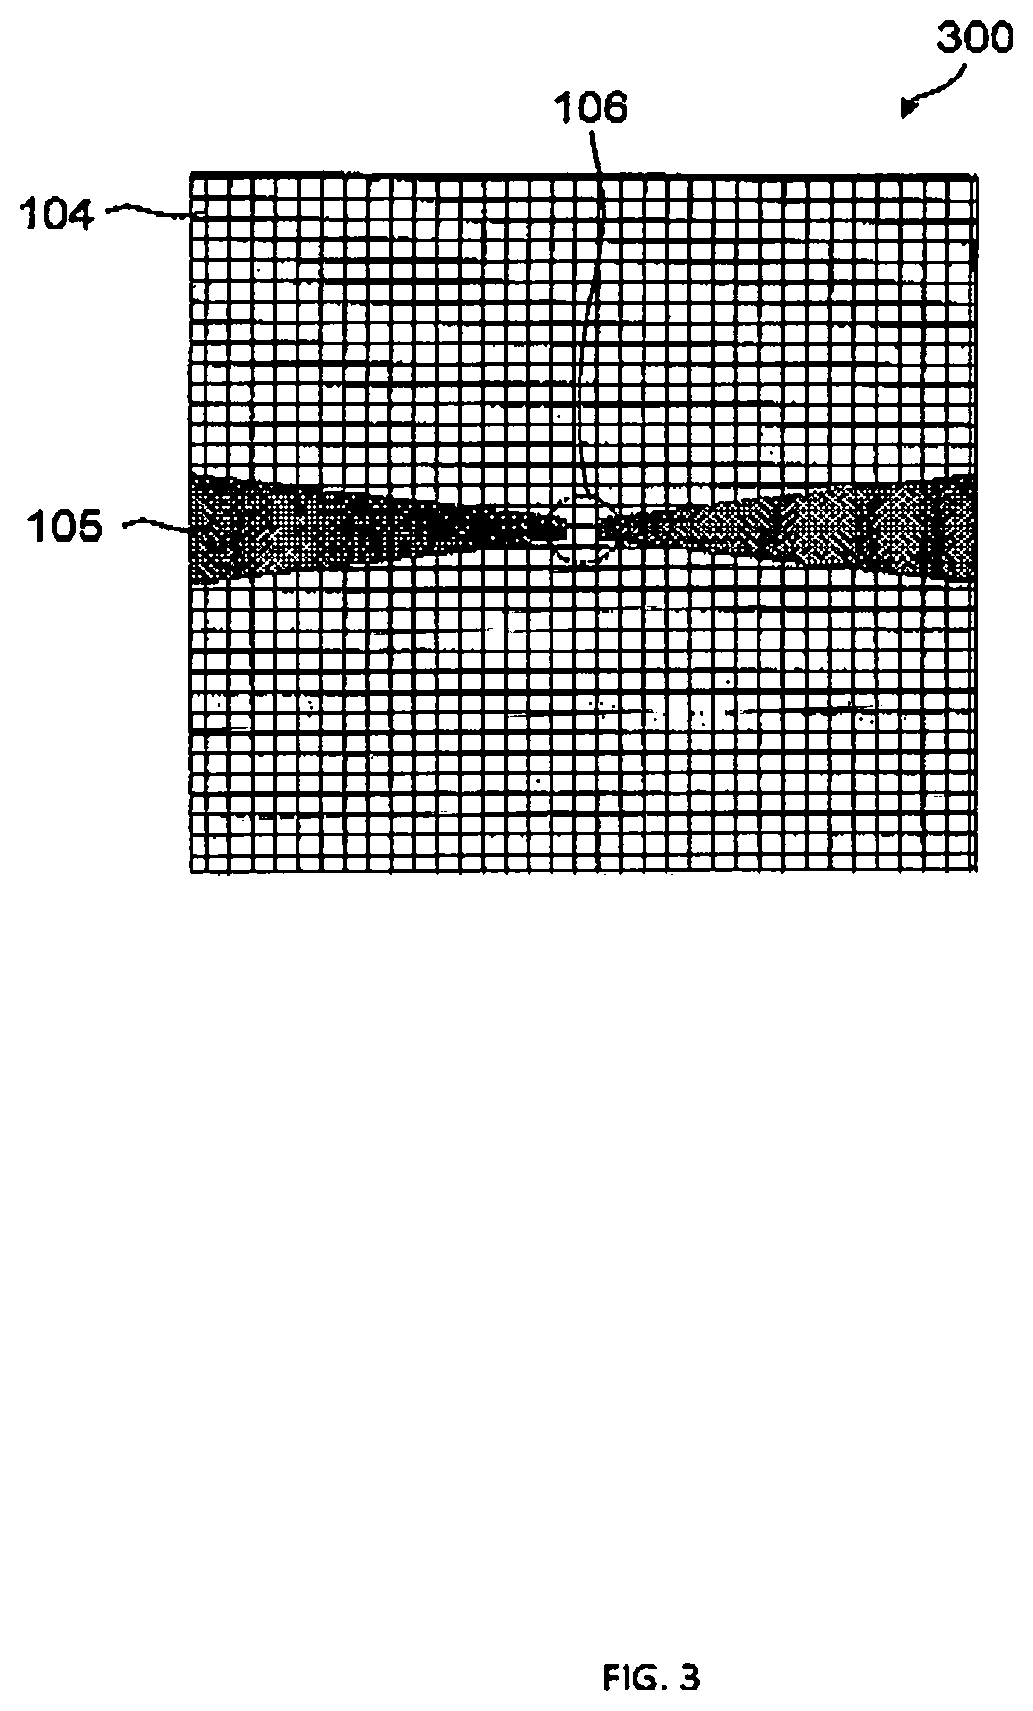 Device and method for bowtie photoconductive antenna for terahertz wave detection